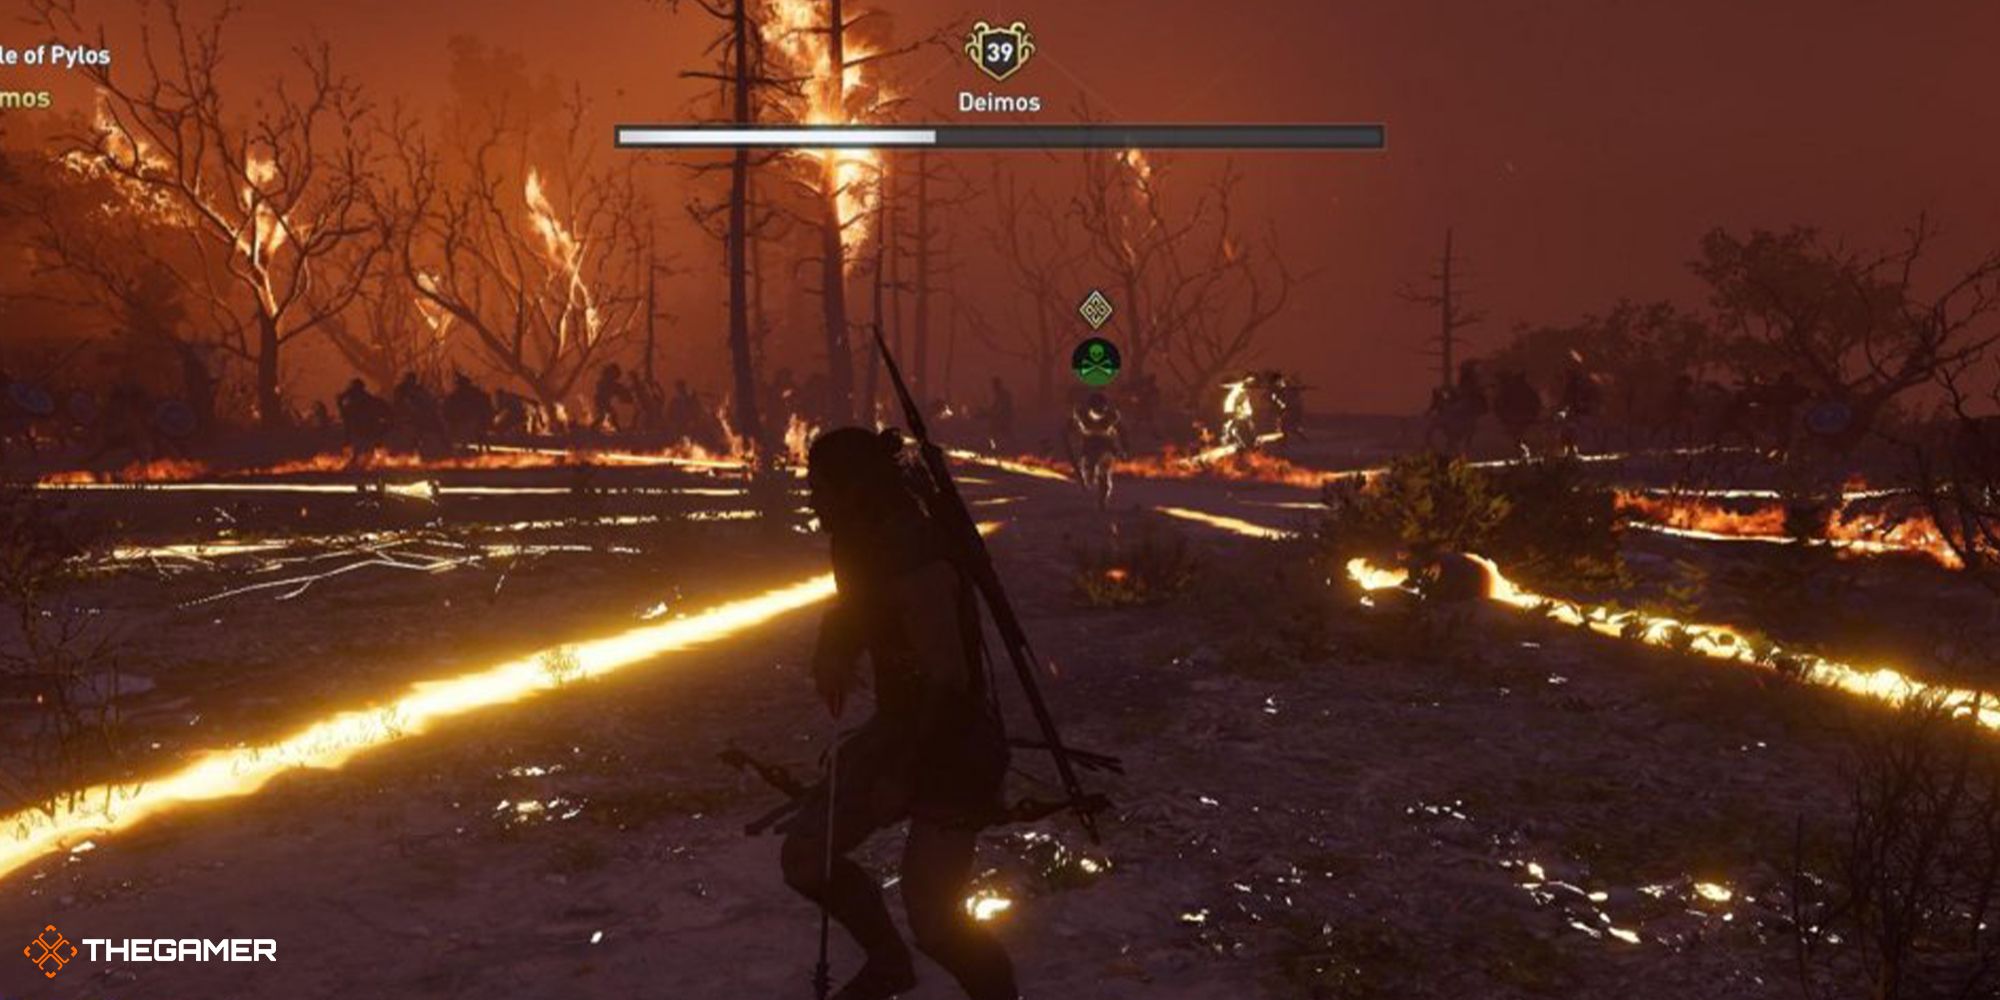 Running from Deimos in a forest reduced to ashes, trees still burning.